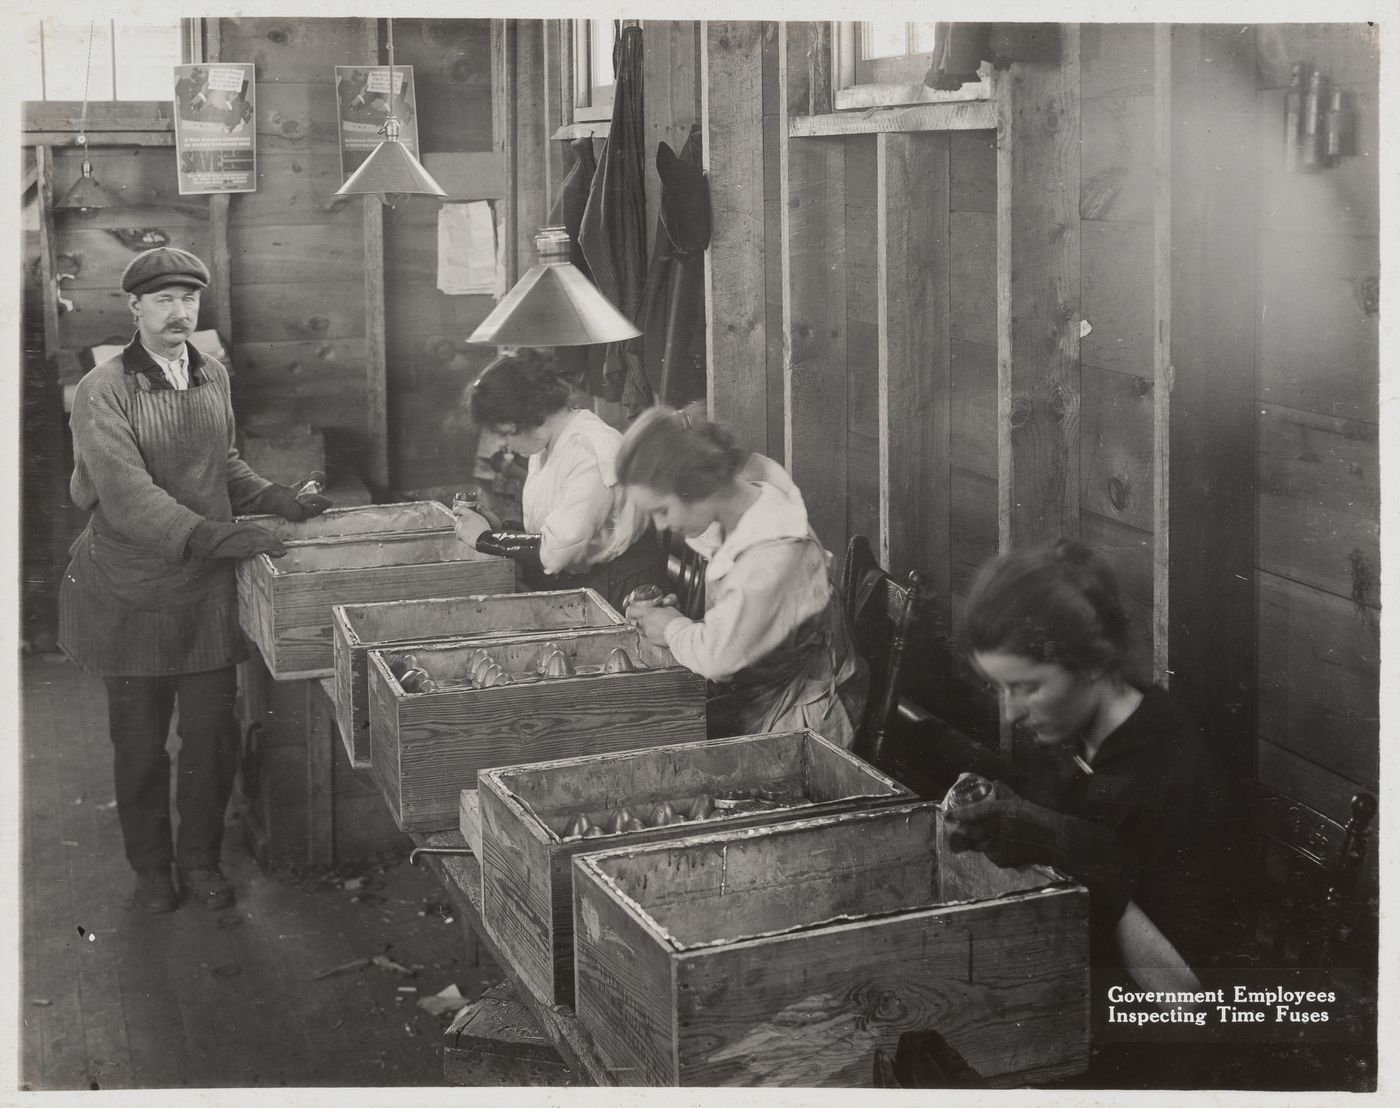 Interior view of workers inspecting time fuses at the Energite Explosives Plant No. 3, the Shell Loading Plant, Renfrew, Ontario, Canada